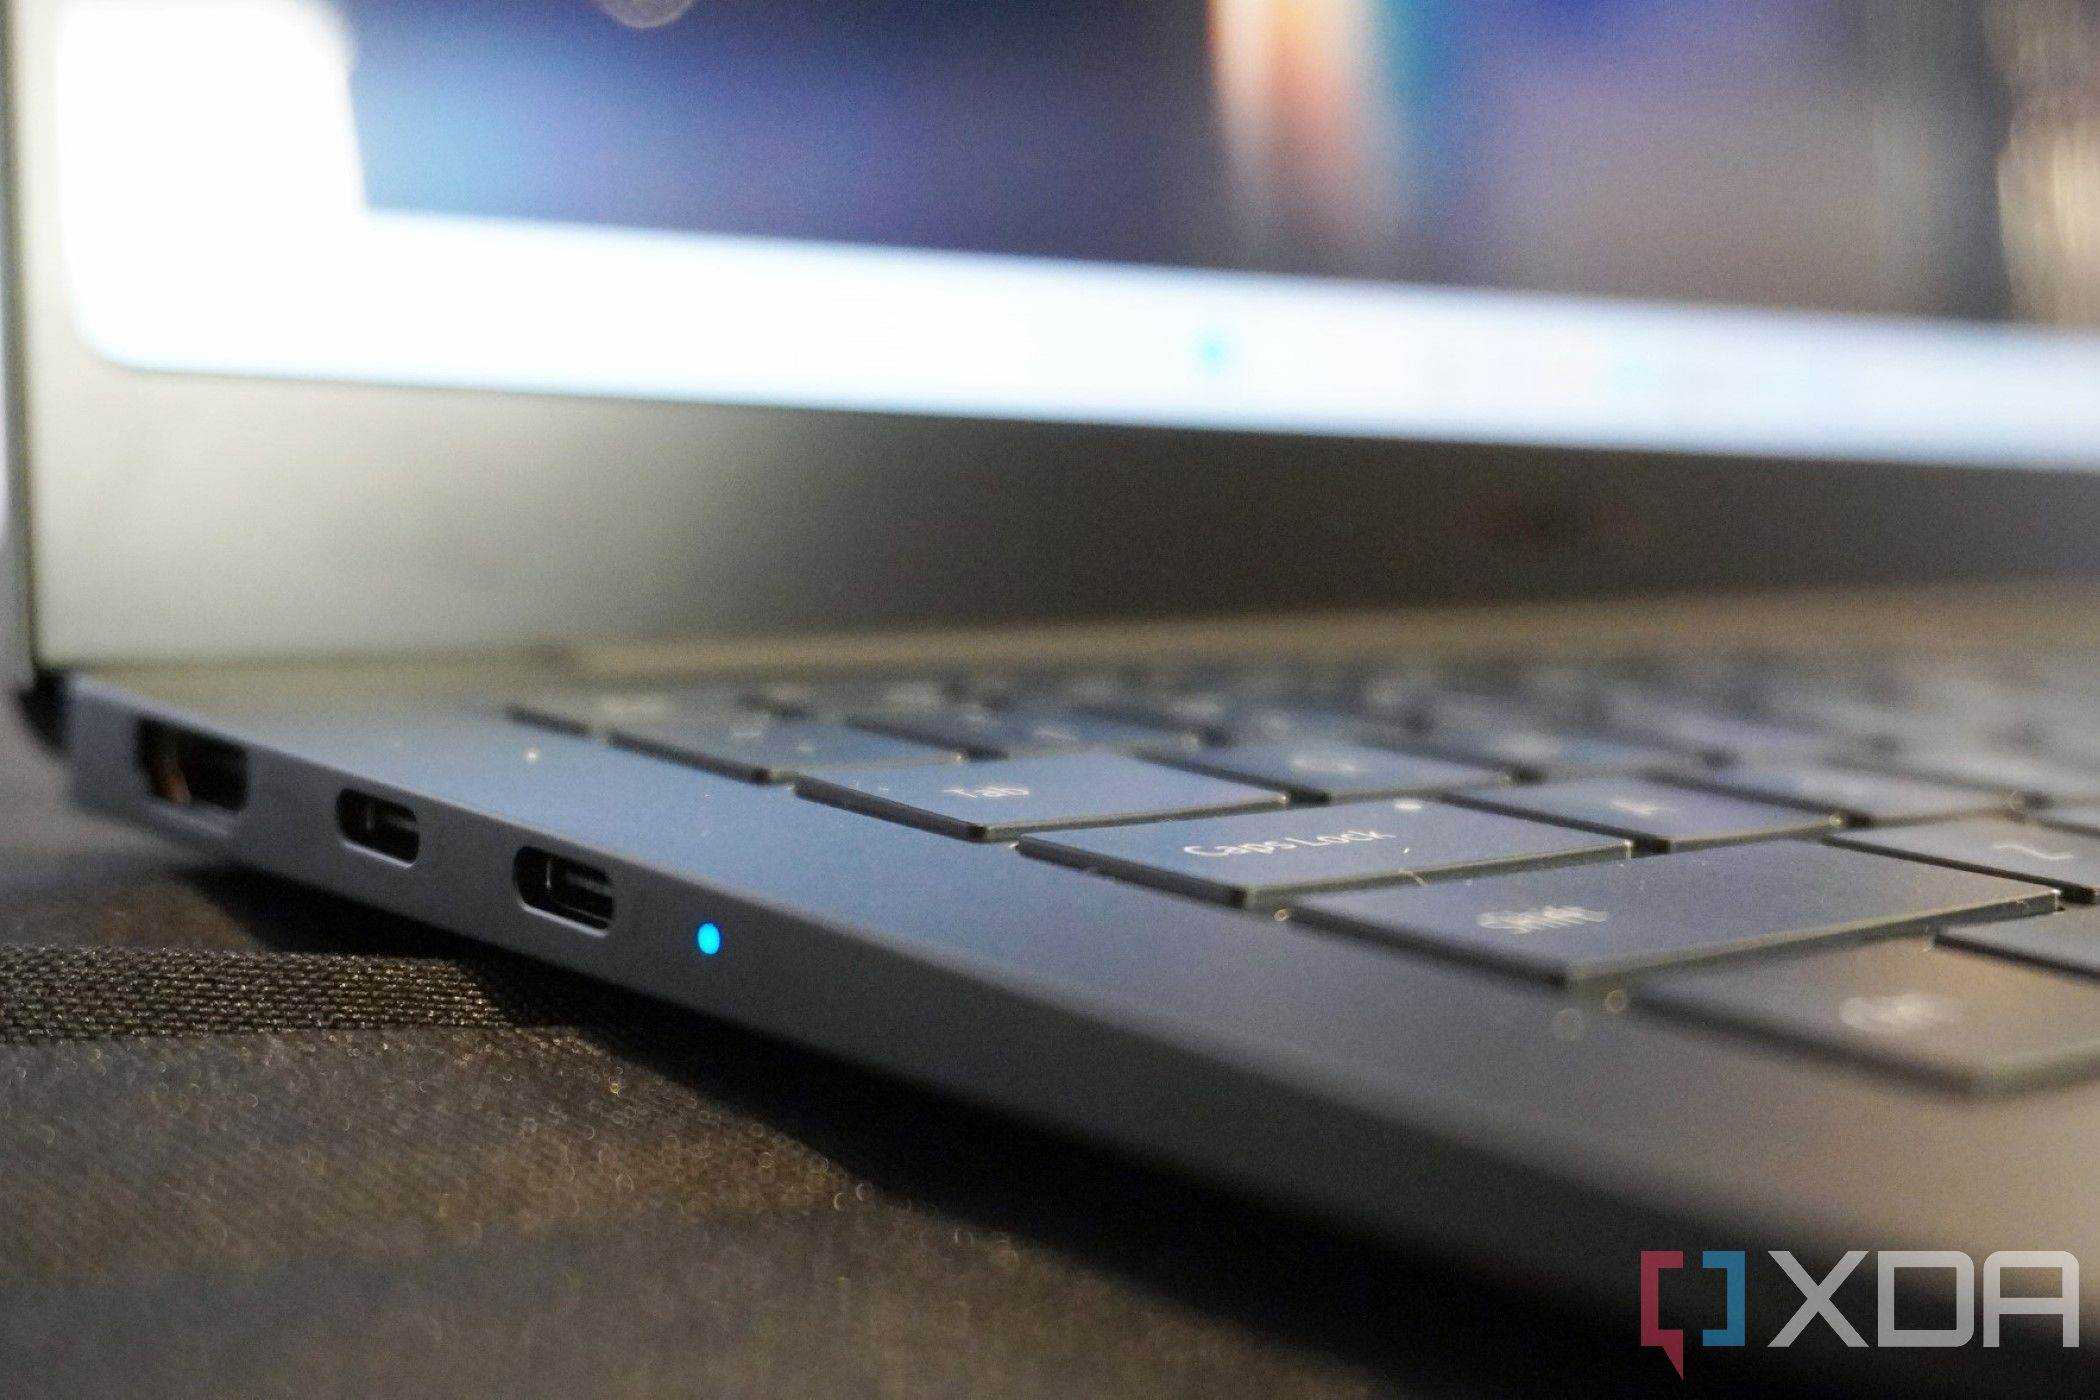 The ports on the Galaxy Book 3 Pro